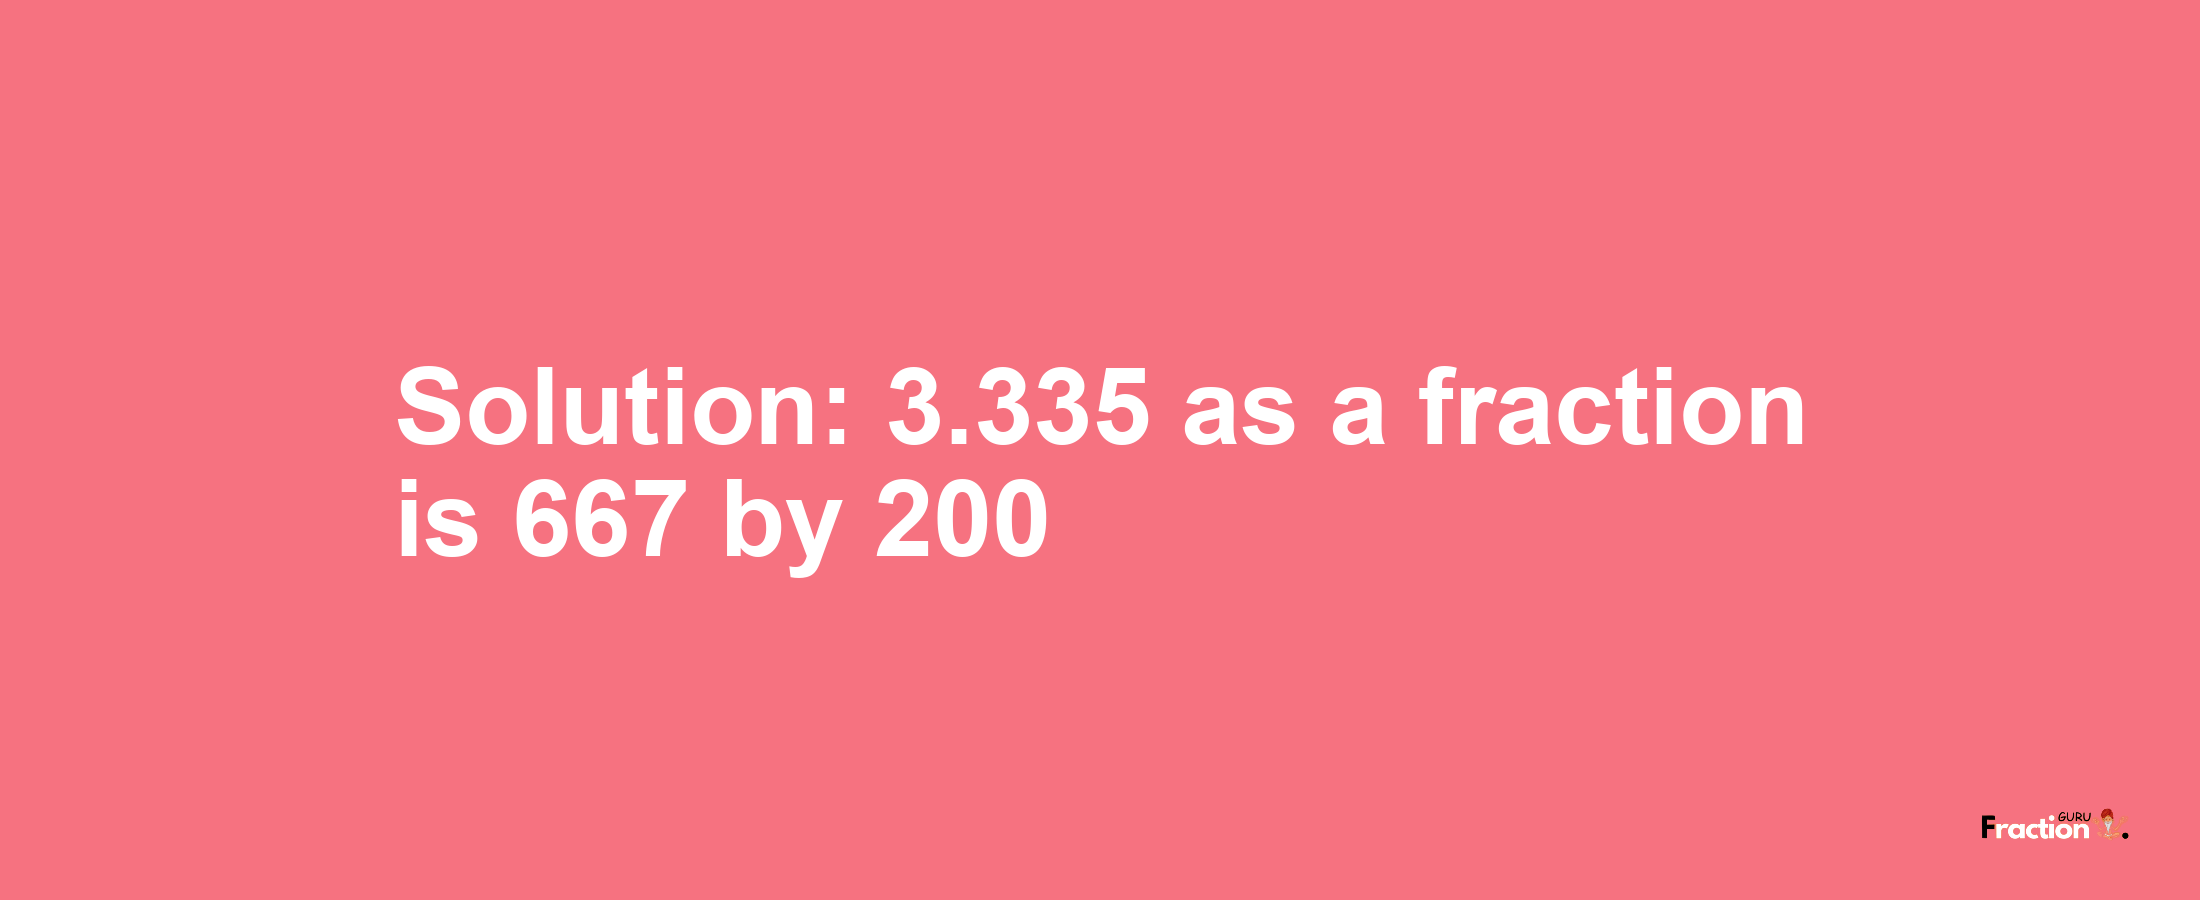 Solution:3.335 as a fraction is 667/200